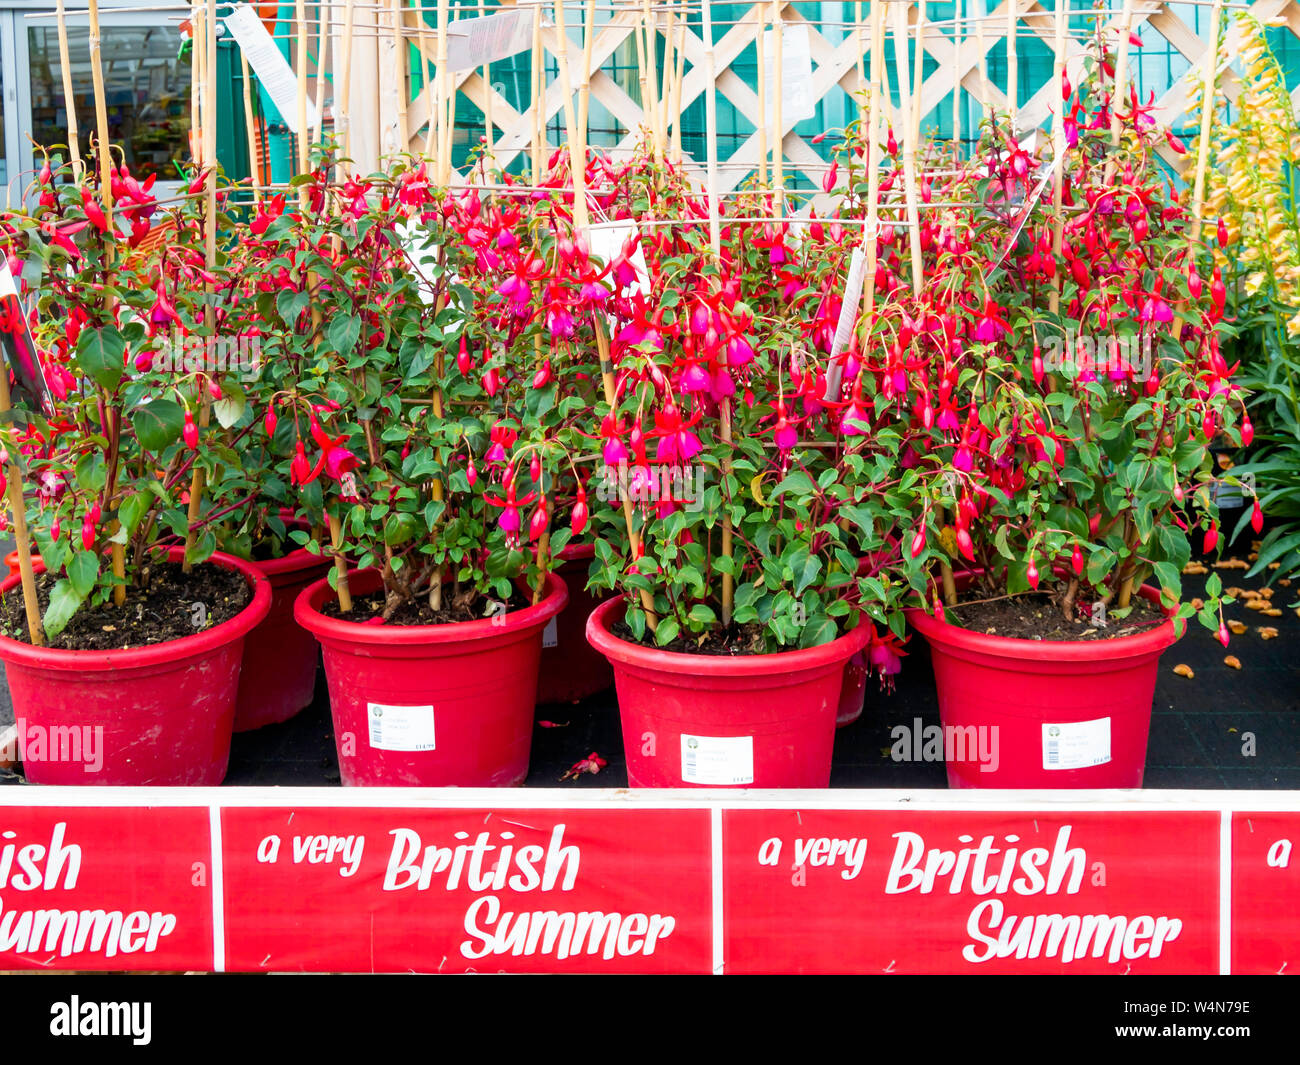 A display of flowering Fuchsia's for sale in a North Yorkshire Garden Centre promoted as - a very British Summer Stock Photo